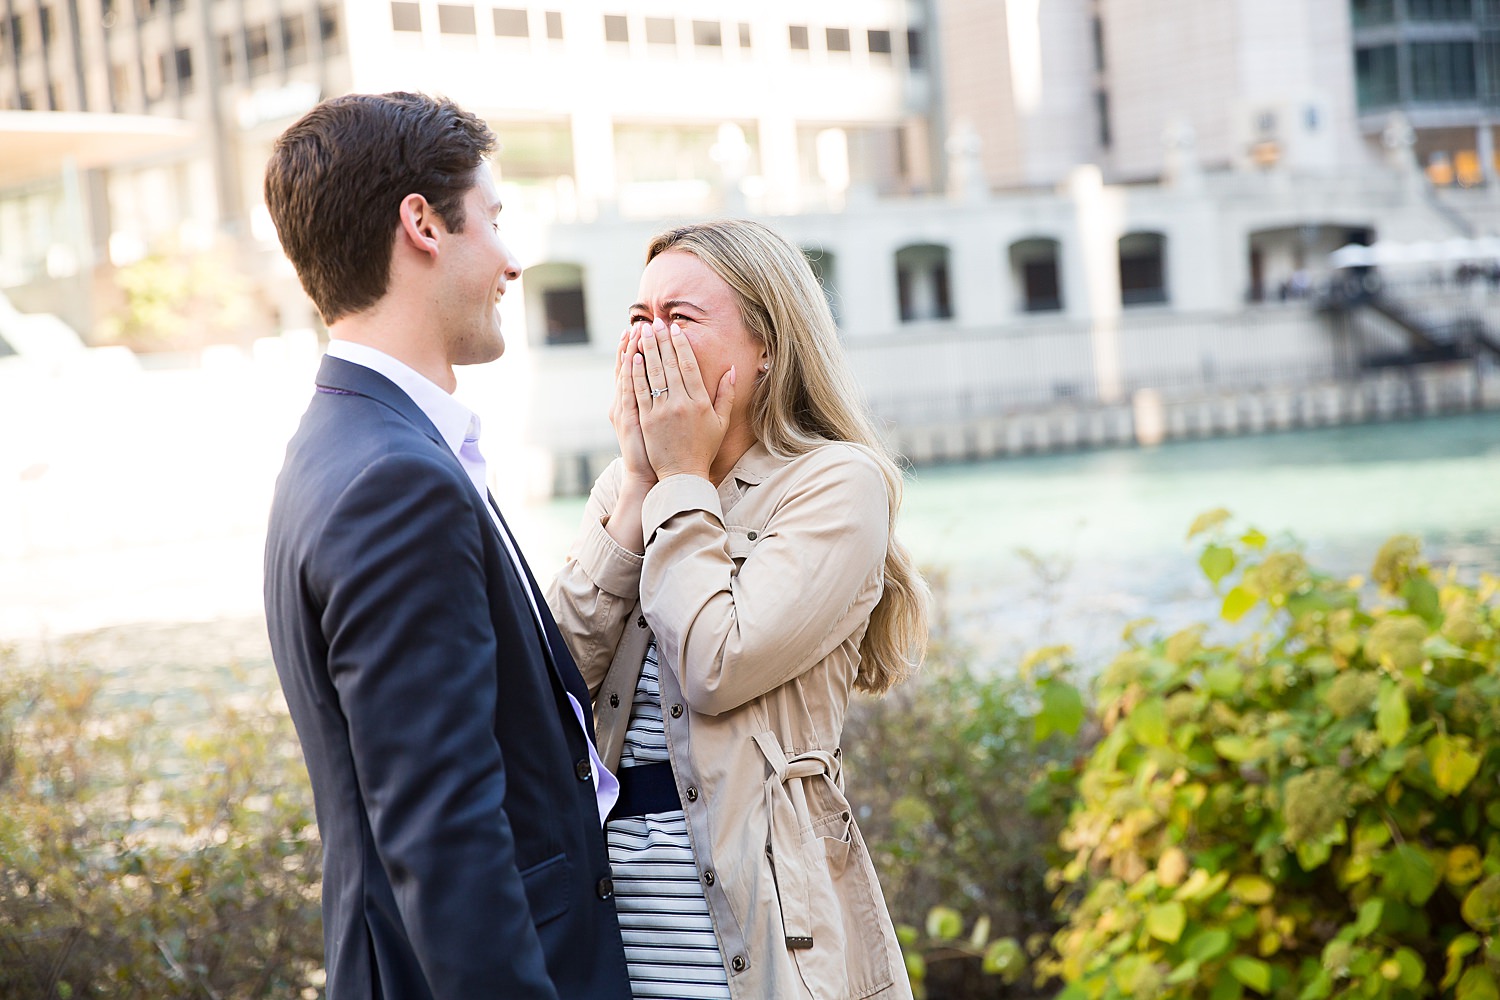 Julia cries after Evan proposes to her on the Chicago Riverwalk.